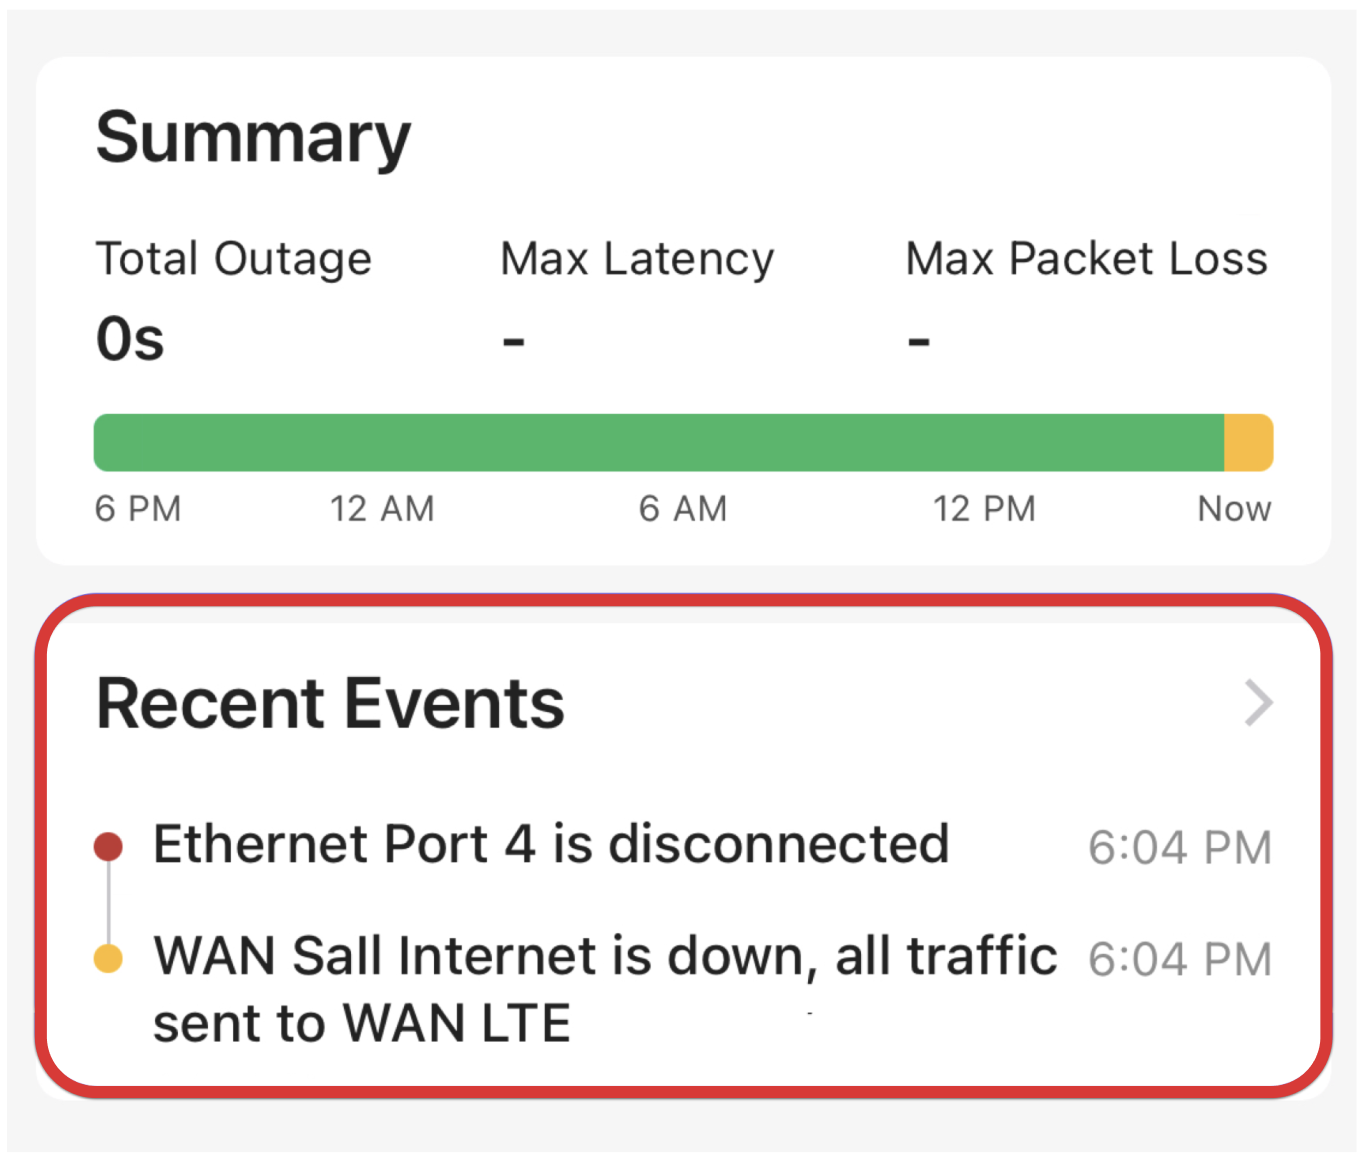 Recent Events recorded 'Ethernet Port 4 is disconnected' and 'WAN Sall Internet is down, all traffic sent to WAN LTE' with timestamps